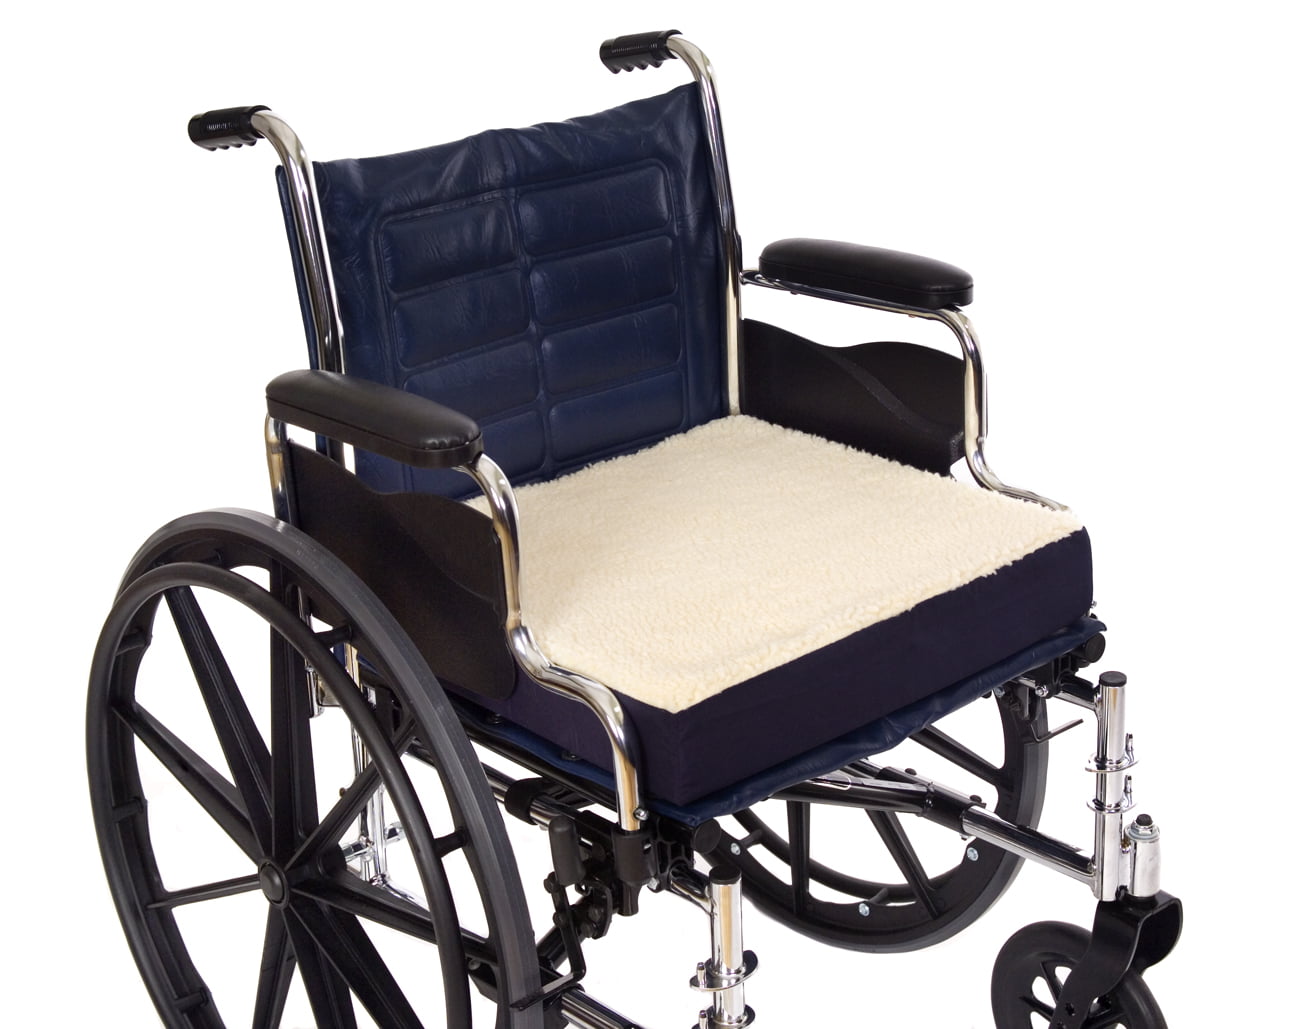 Short Wave Geri Cushion, Wheelchair Seat and Back Cushion, Removable Zippered Cover, Reduces Shear, Fluid-Repellant Cover, Wipes Clean, Easy to Use.